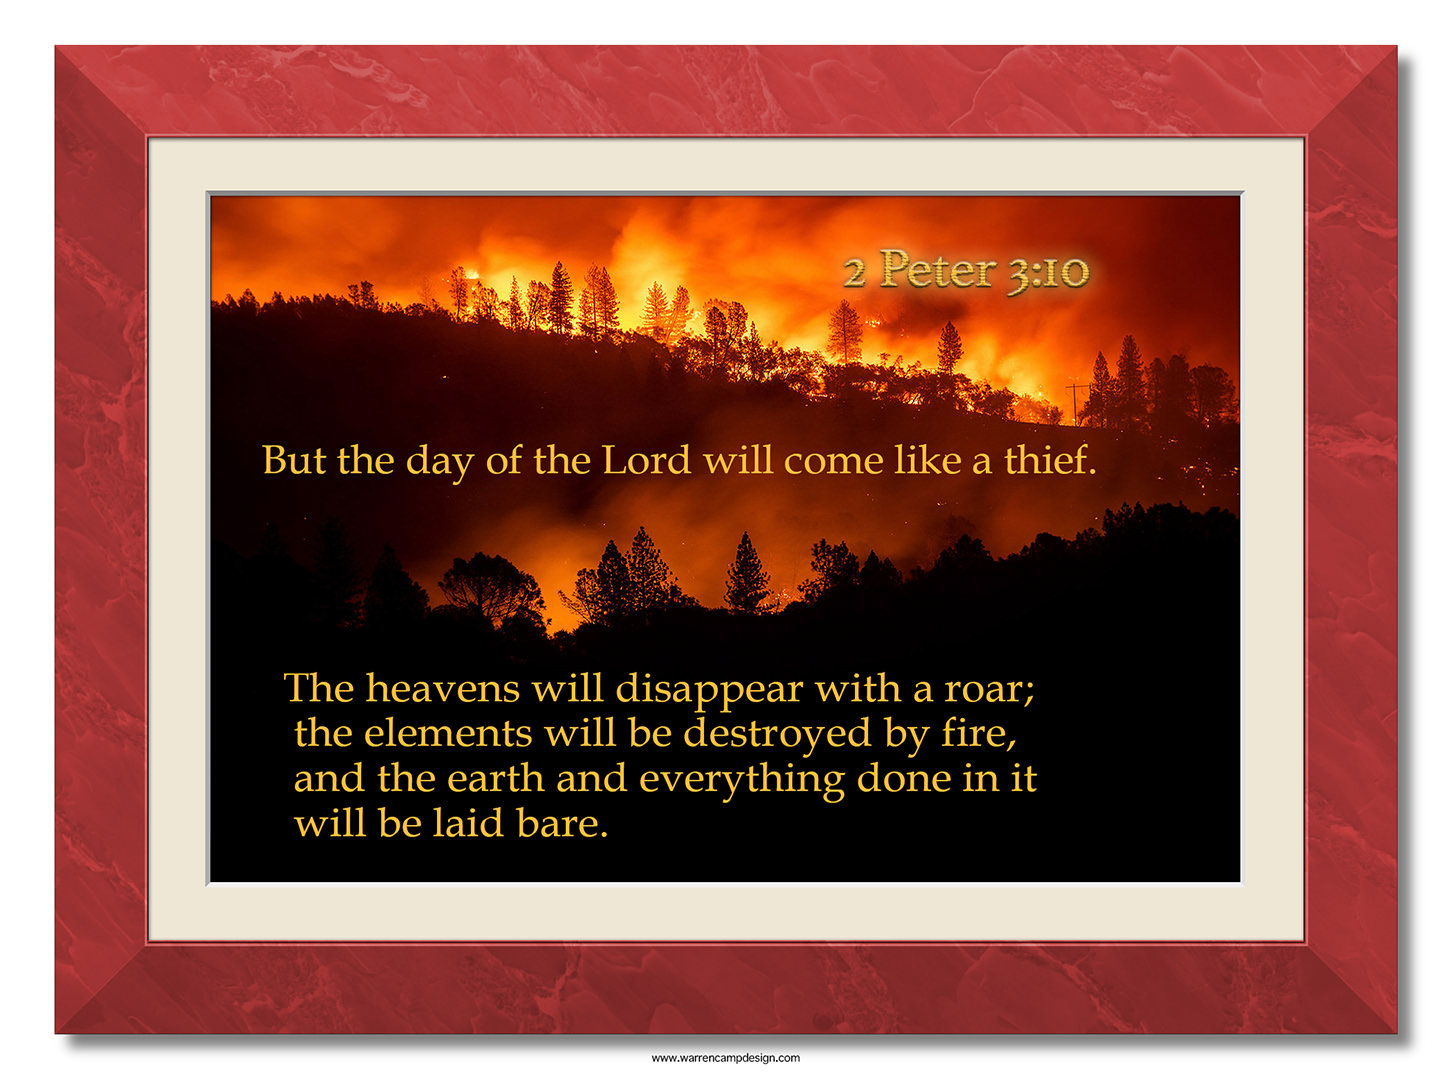 Scripture picture of 2nd Peter 3:10, emphasizing the fact that the day of the Lord will come like a thief